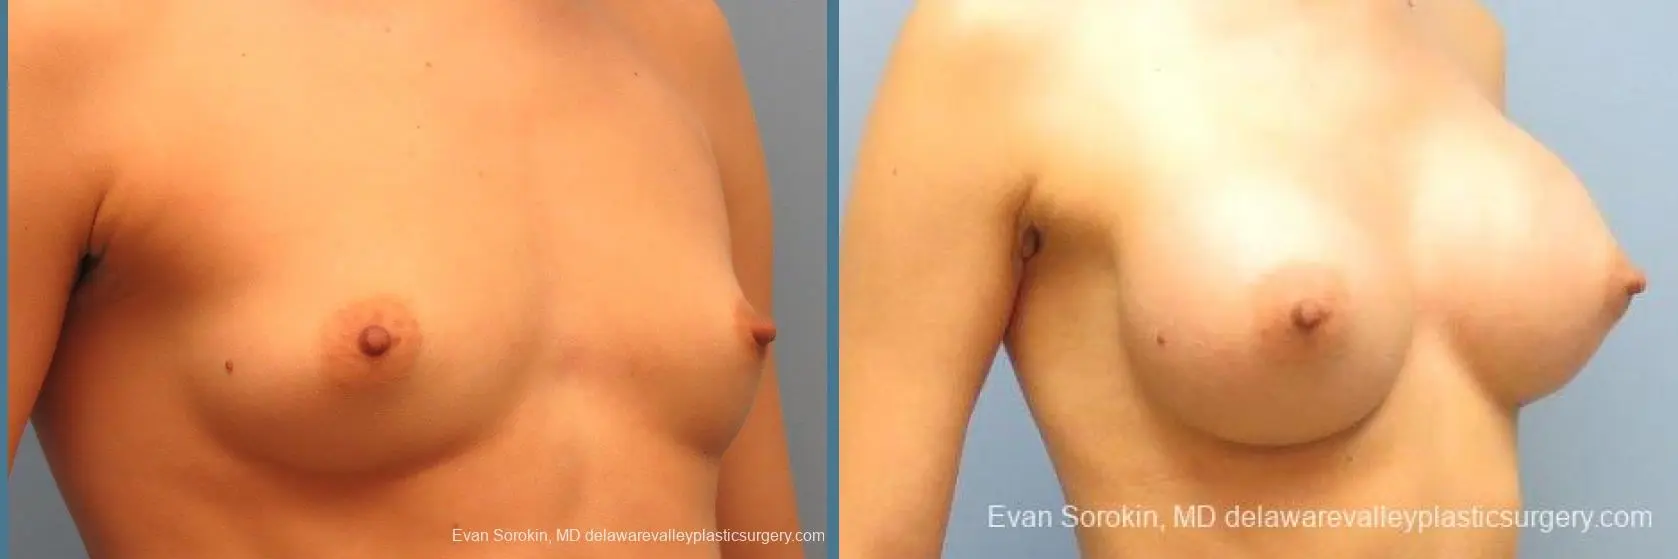 Philadelphia Breast Augmentation 10097 - Before and After 2